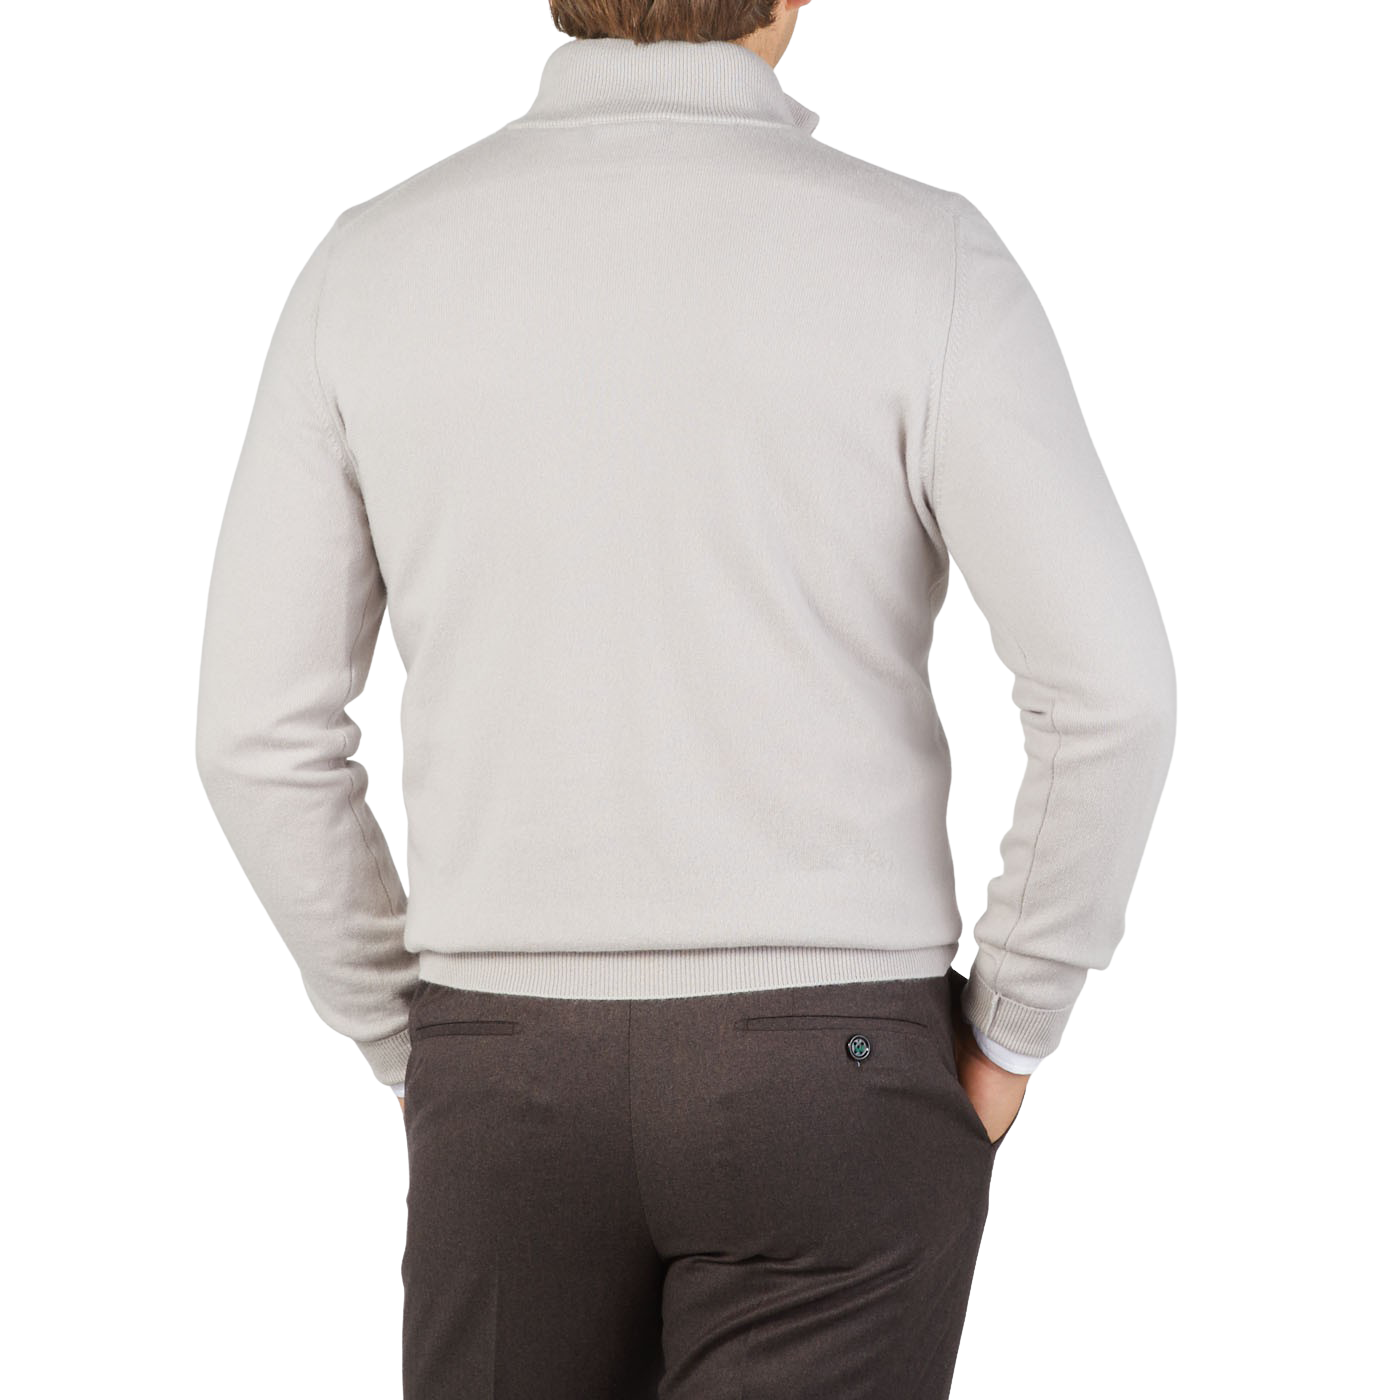 Gran Sasso Light Taupe Cashmere 1:4 Zip Sweater Back